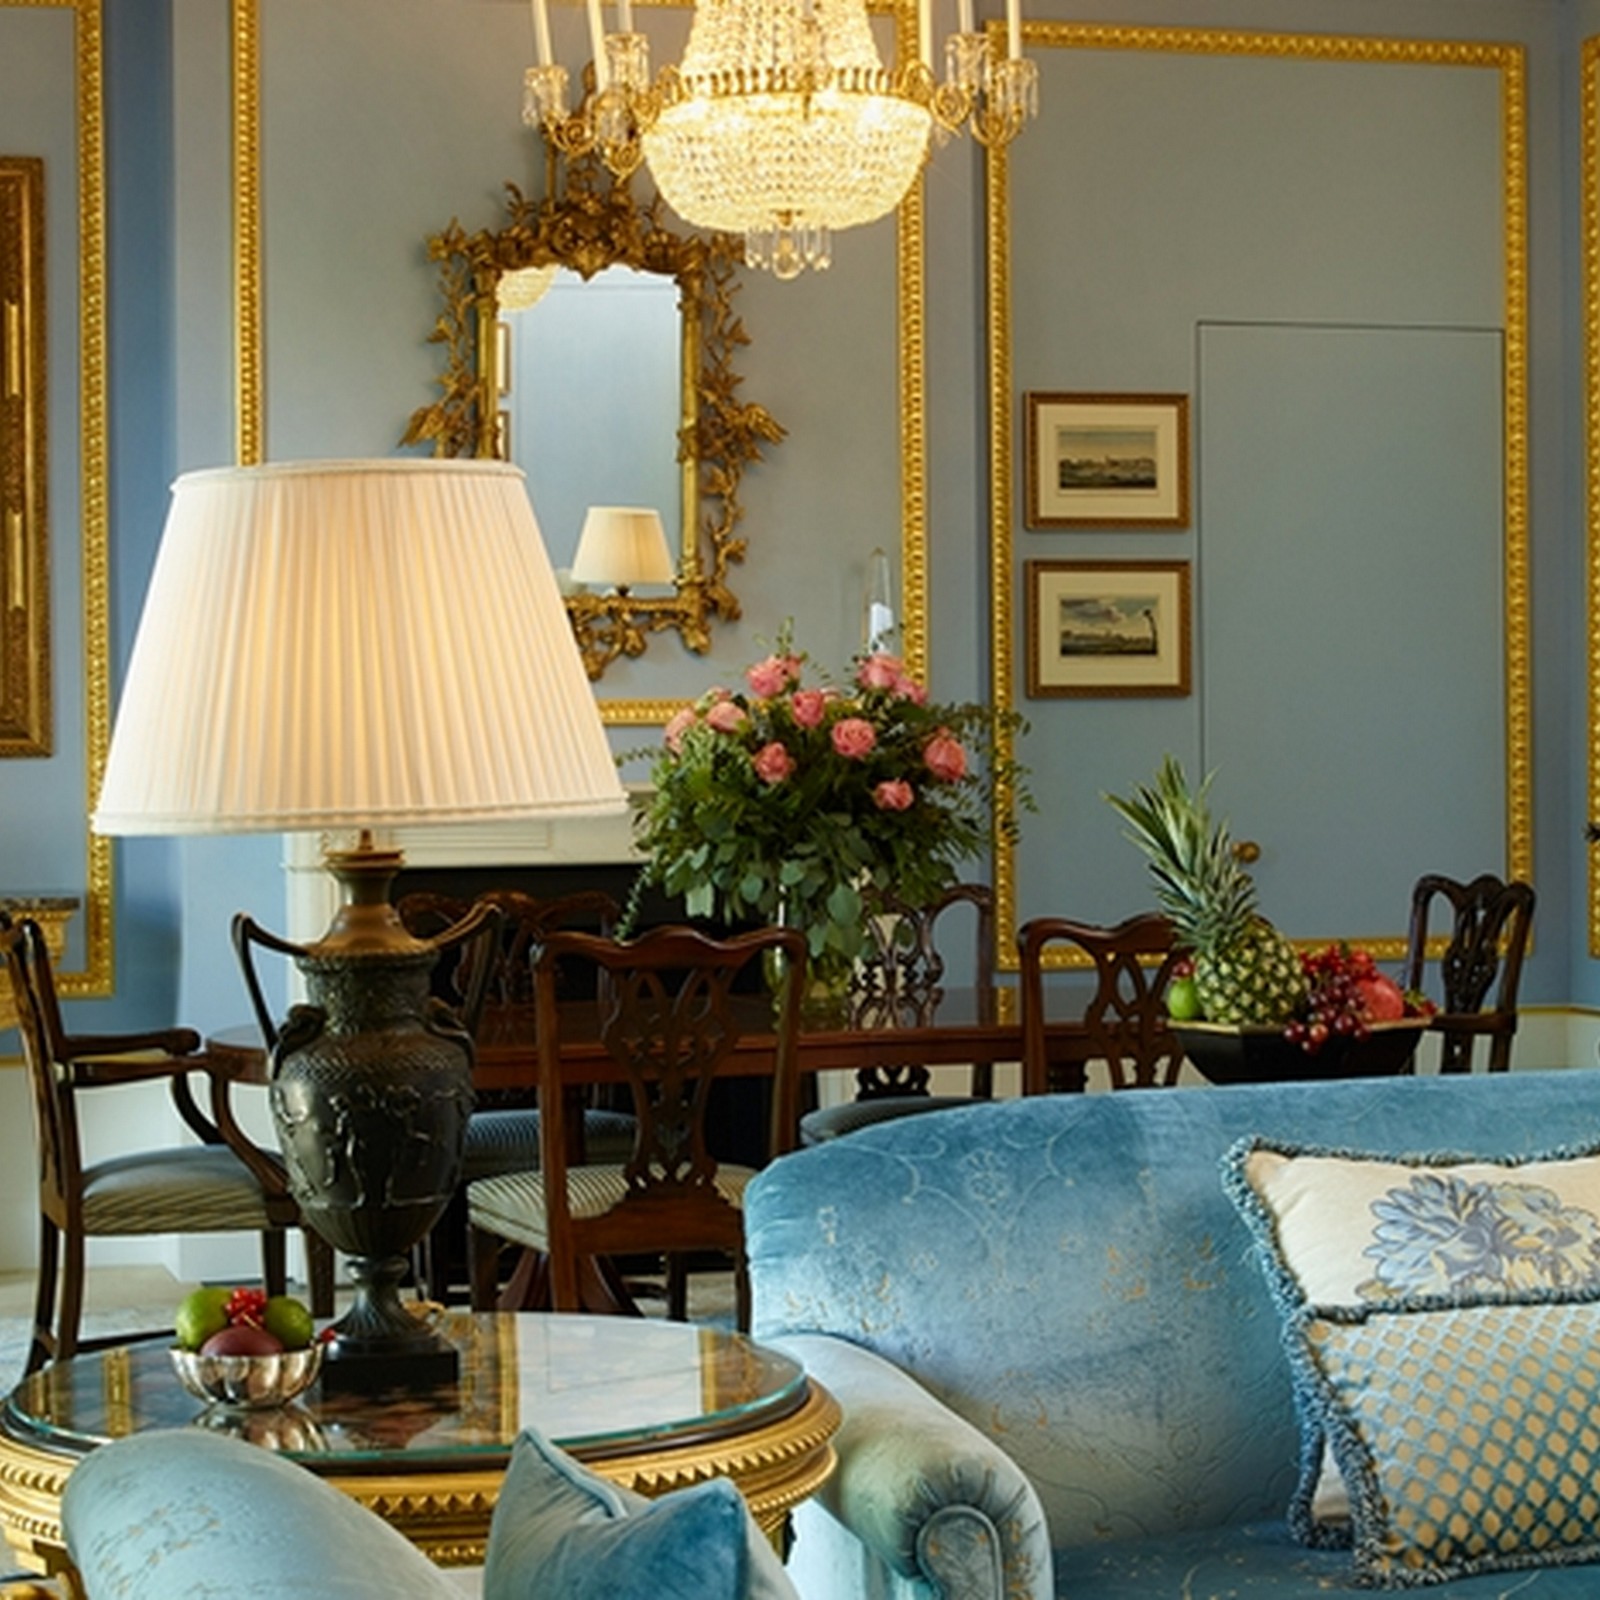 get preferential treatment and amazing rates at the Lanesborough hotel wiht your hotel concierge